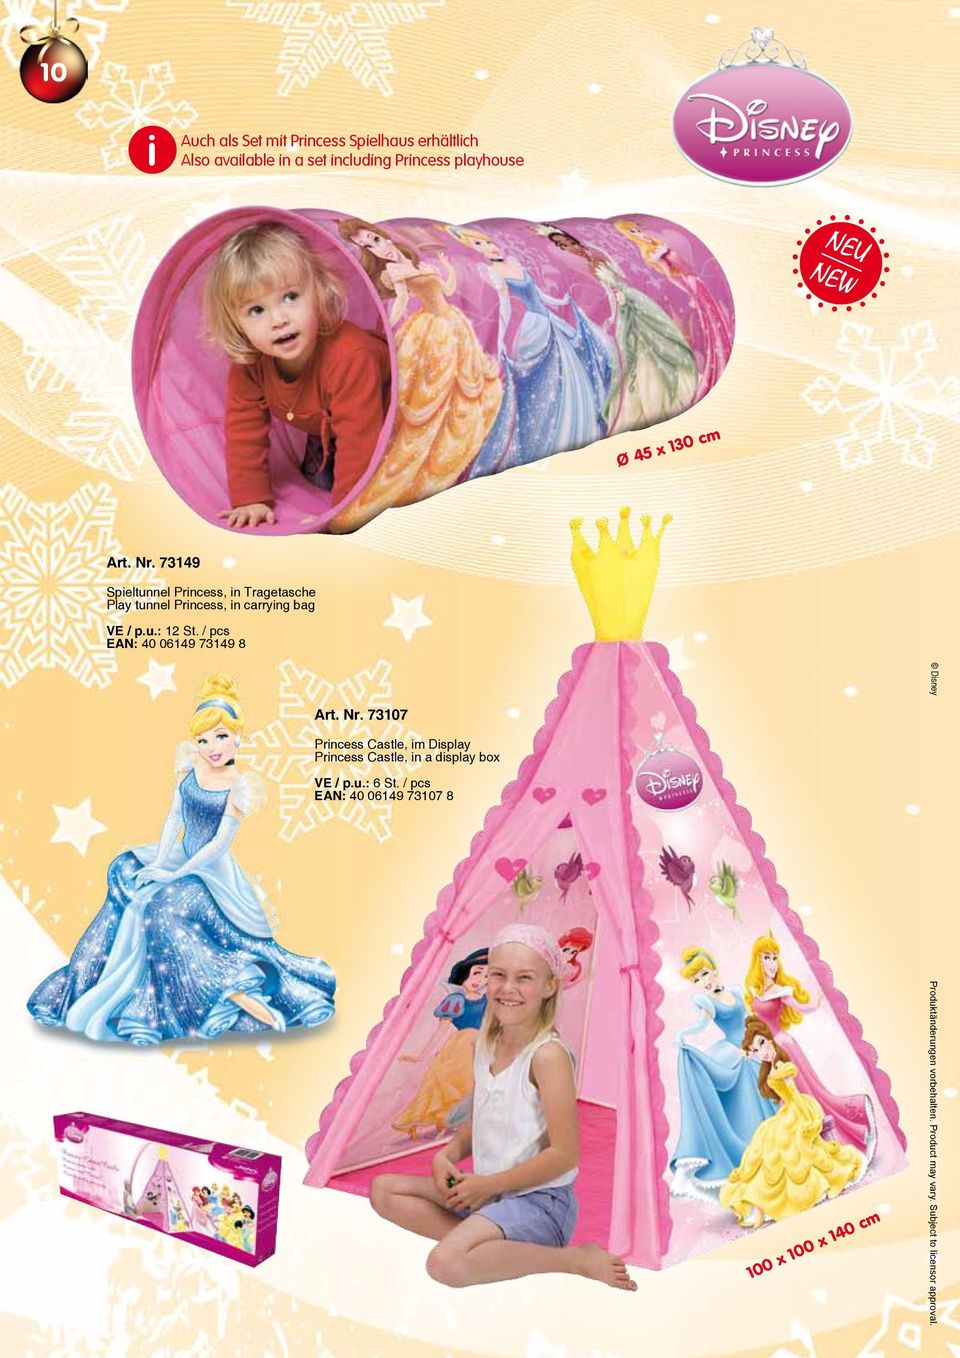 73149 Spieltunnel Princess, in Tragetasche Play tunnel Princess, in carrying bag VE / p.u.: 12 St.